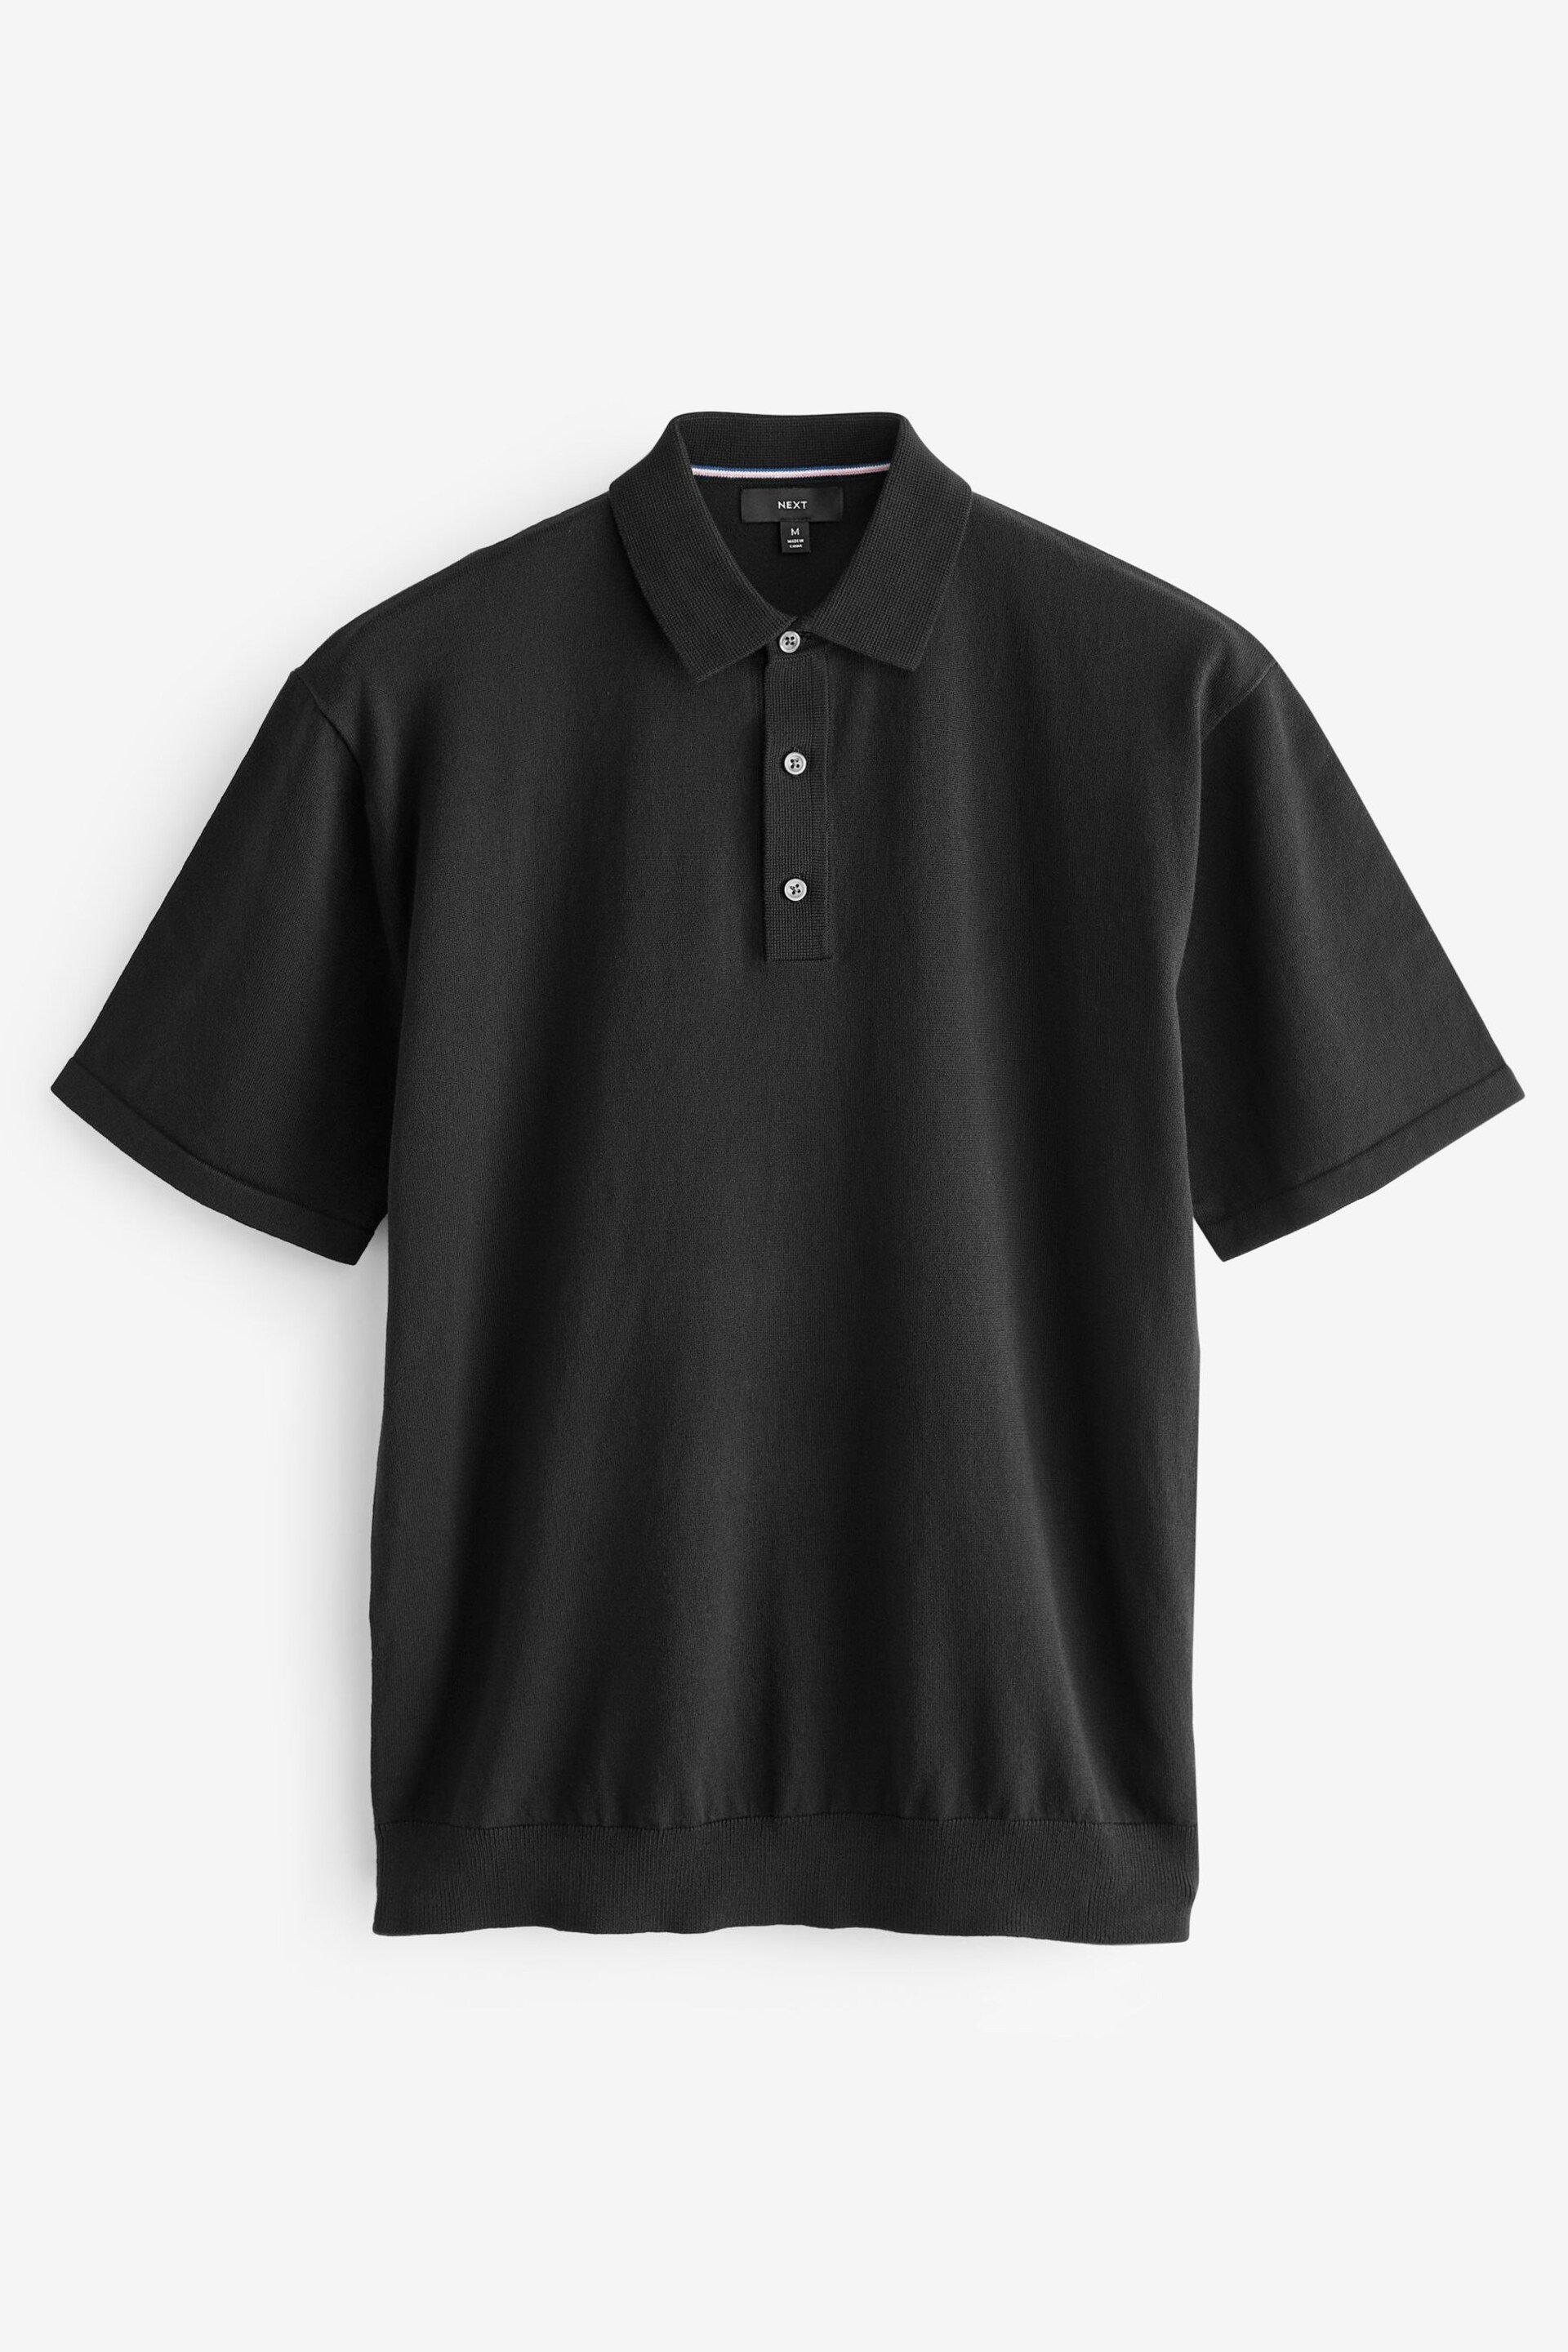 Black/Navy Knitted Regular Fit 2 Pack Polo Shirts - Image 11 of 13